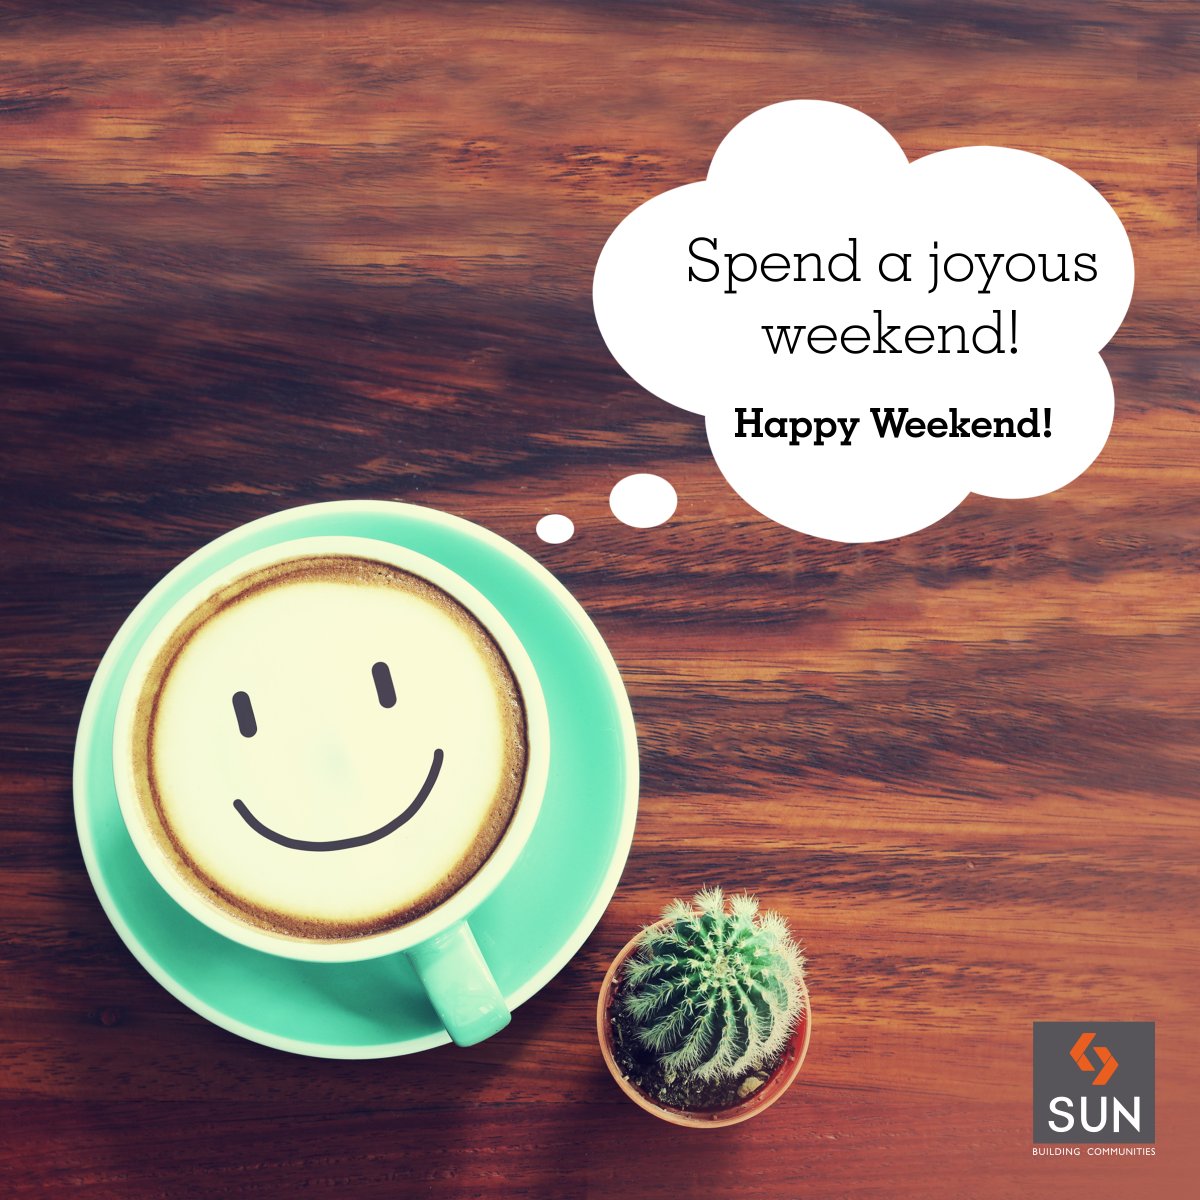 Kickstart your weekend morning with a cup of your favourite cup of coffee.
#HappyWeekend to all! https://t.co/0sGMnyPhIX